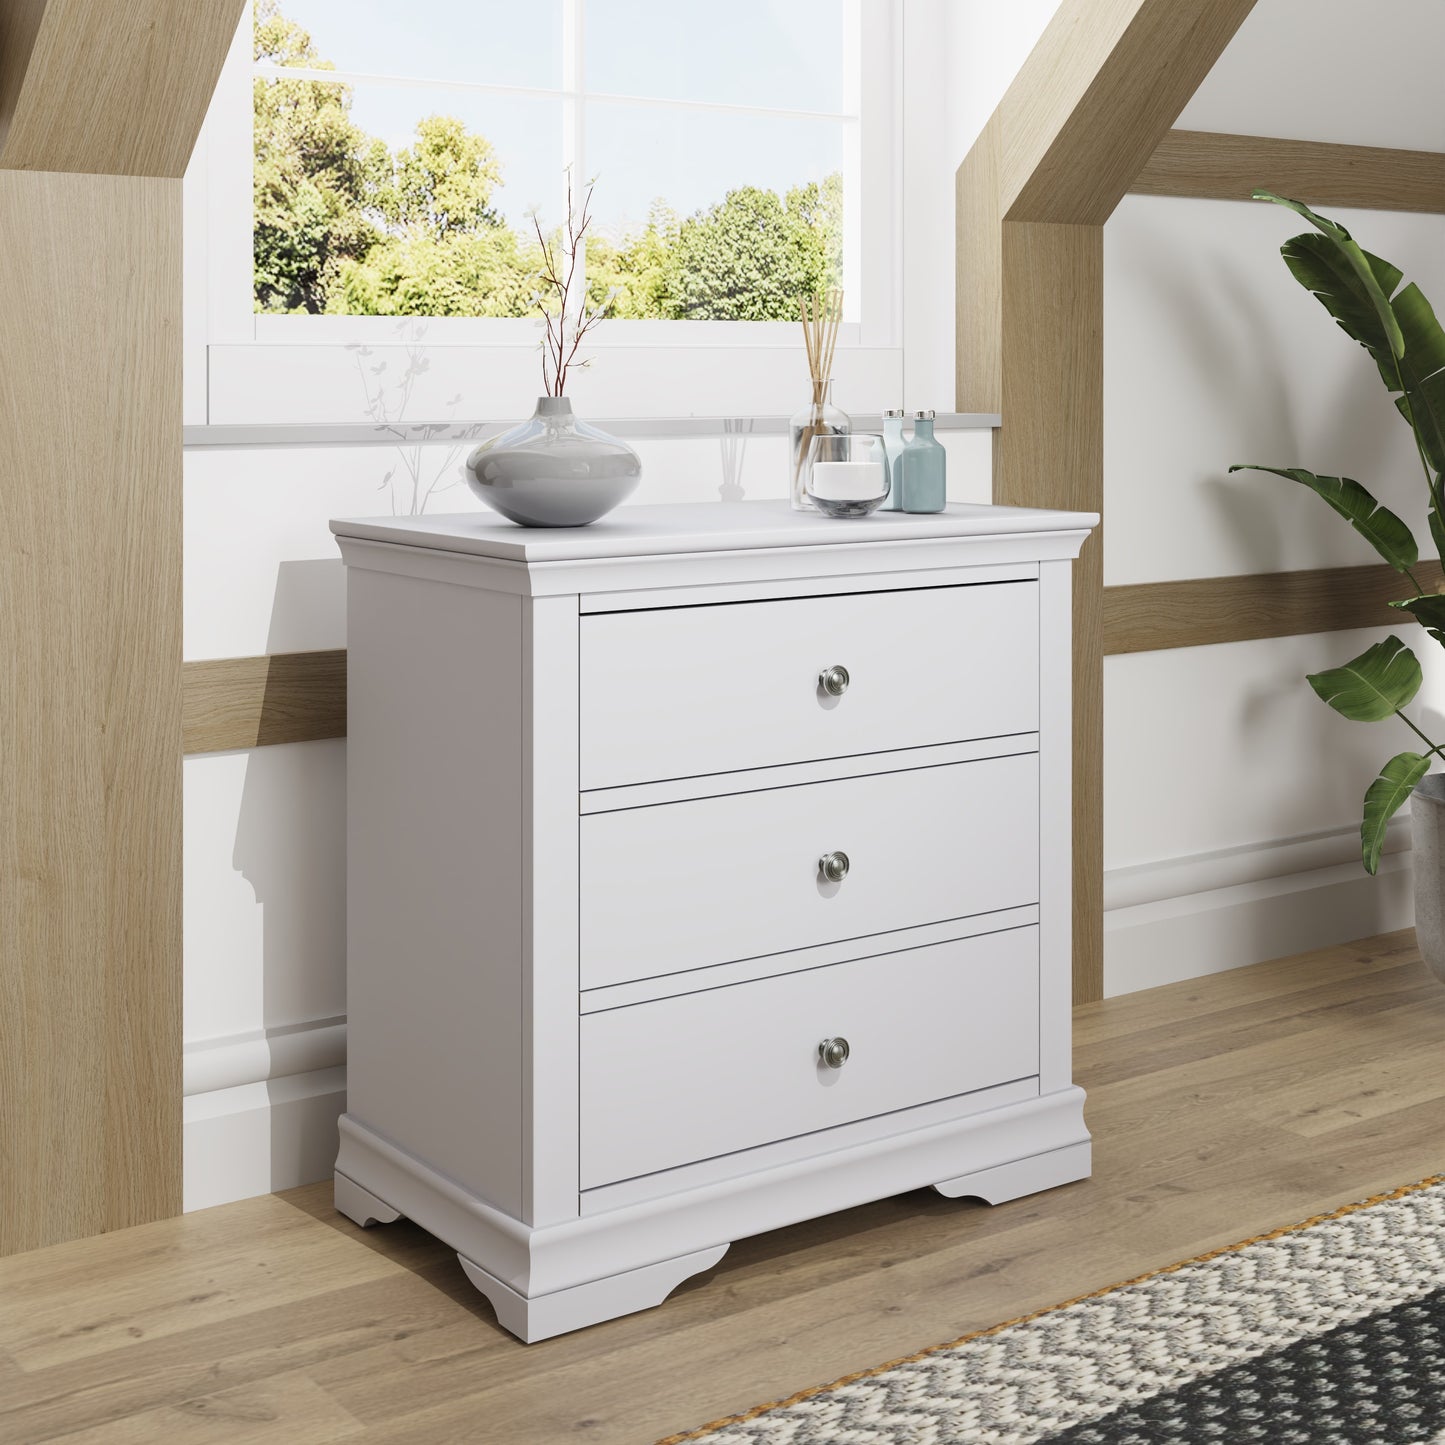 SW Bedroom - Grey 3 Drawer Chest